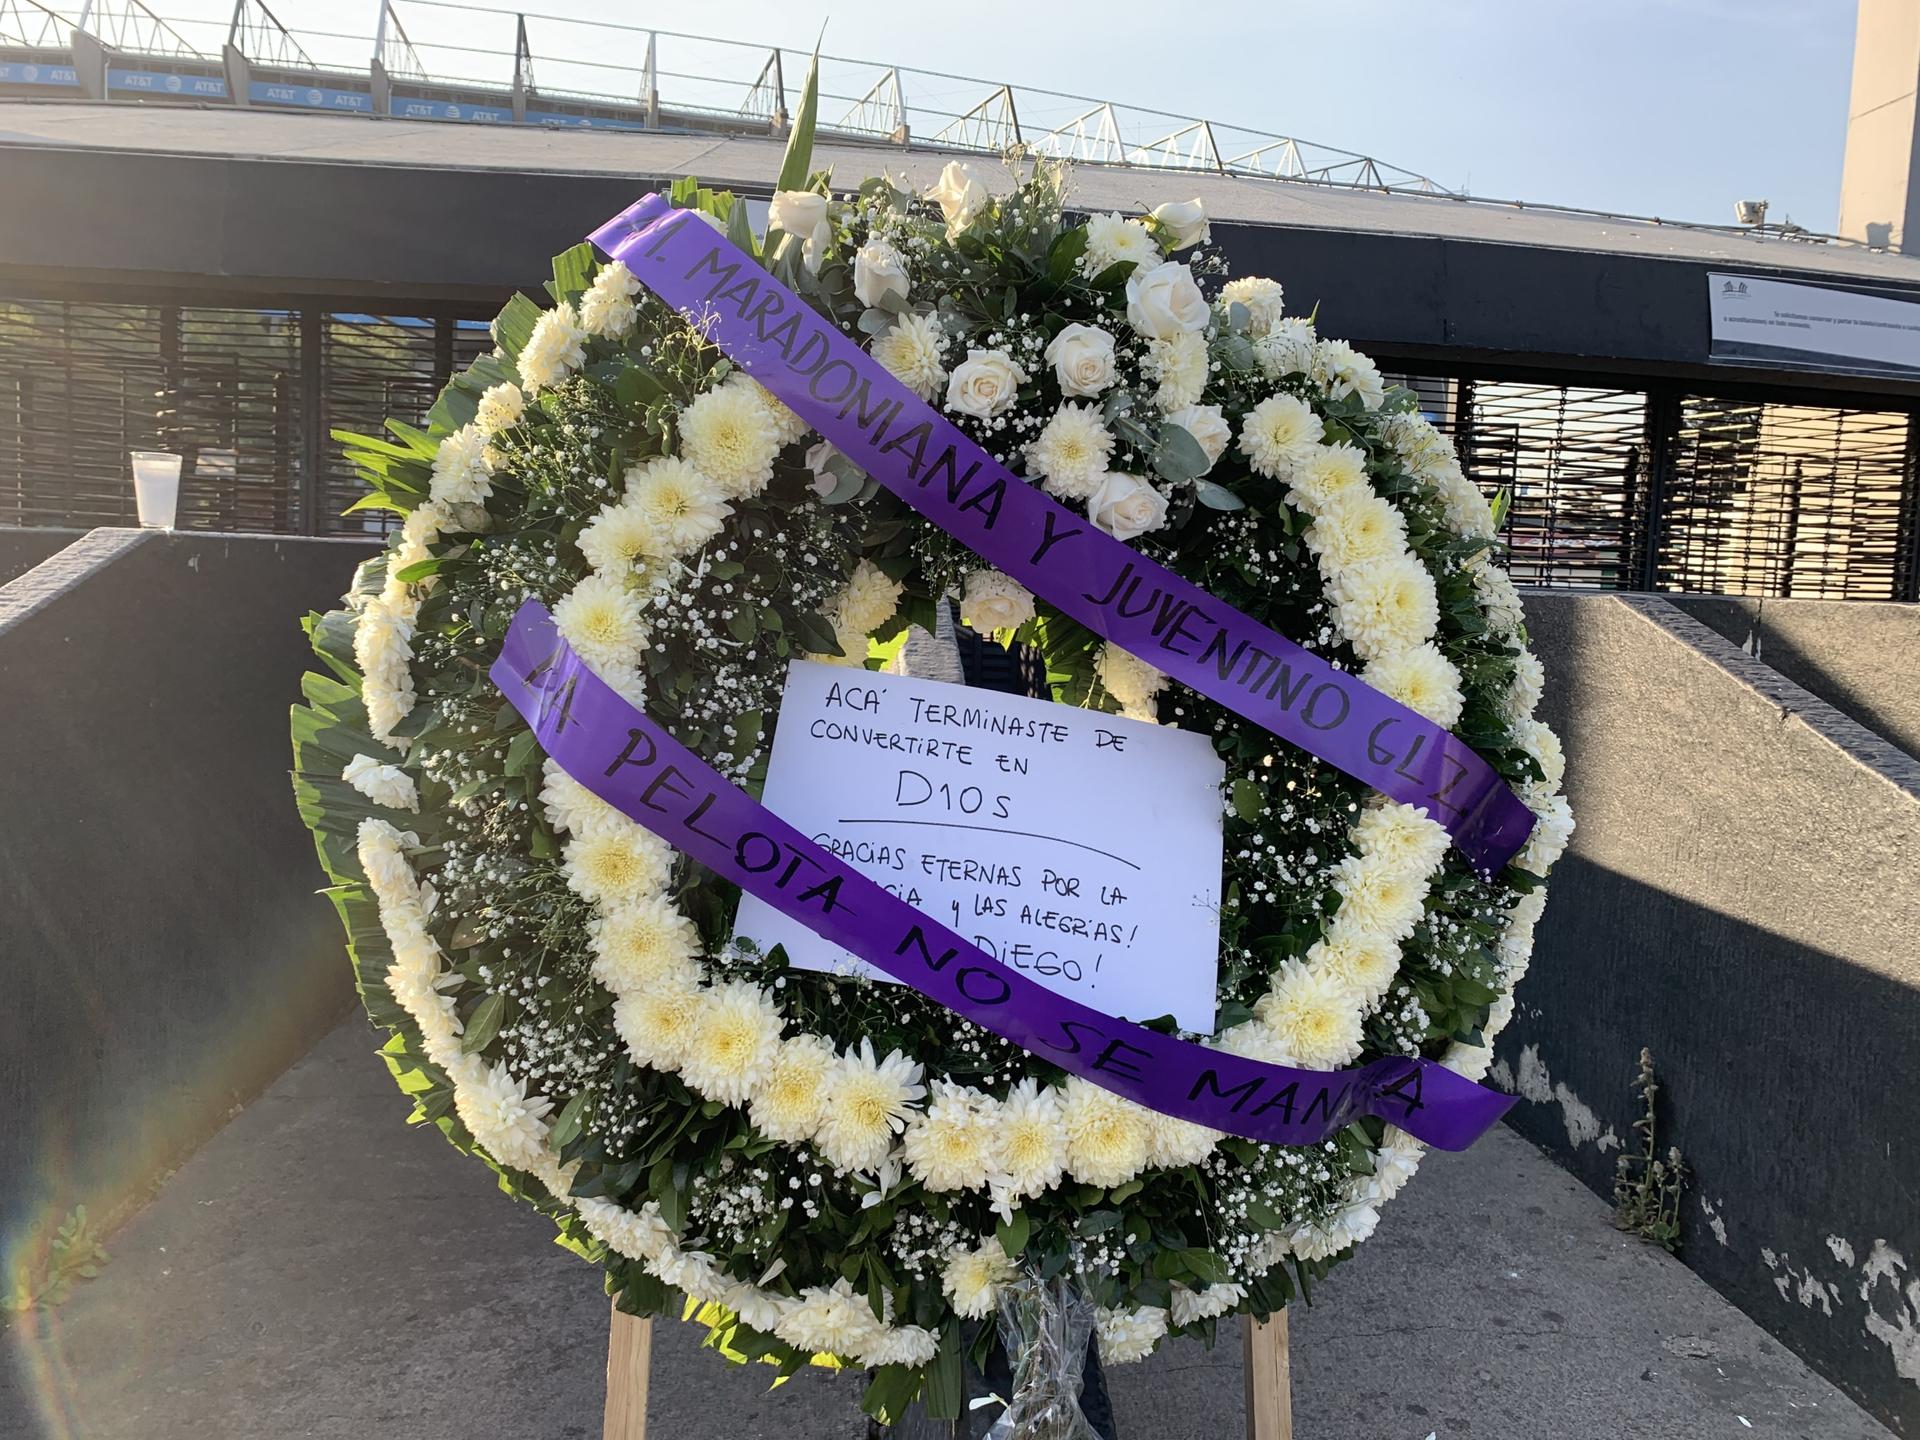 A wreath for Diego Maradona reading, "This is where you became God" sits outside Estadio Azteca, the stadium where Maradona led Argentina to defeat England in the 1986 World Cup, in Mexico City, Mexico, Nov. 26, 2020.